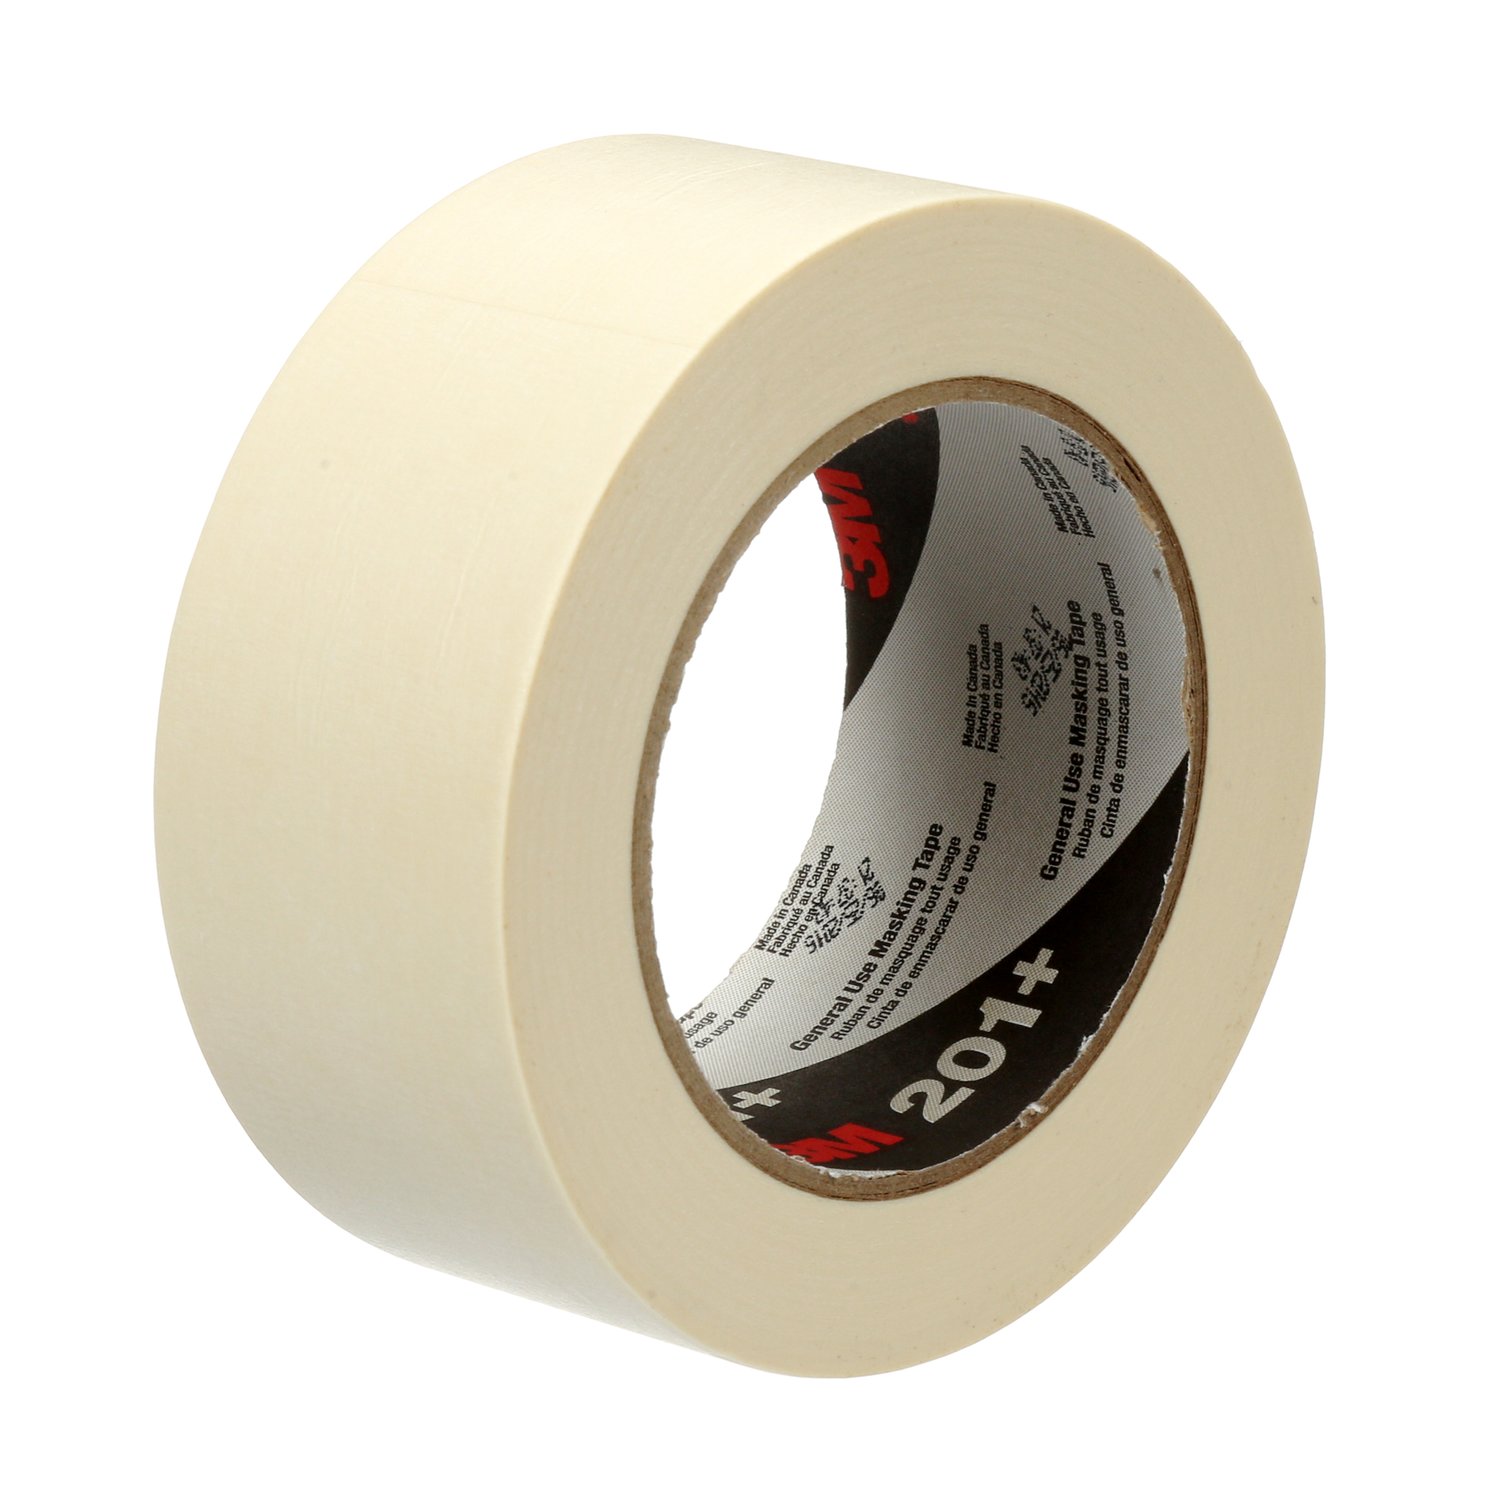 3M General Use 201+ Masking Tape - 0.875 in. (W) x 180 ft. (L) Crepe  Masking Tape Roll with Solvent Free Rubber Adhesive, Large, Natural